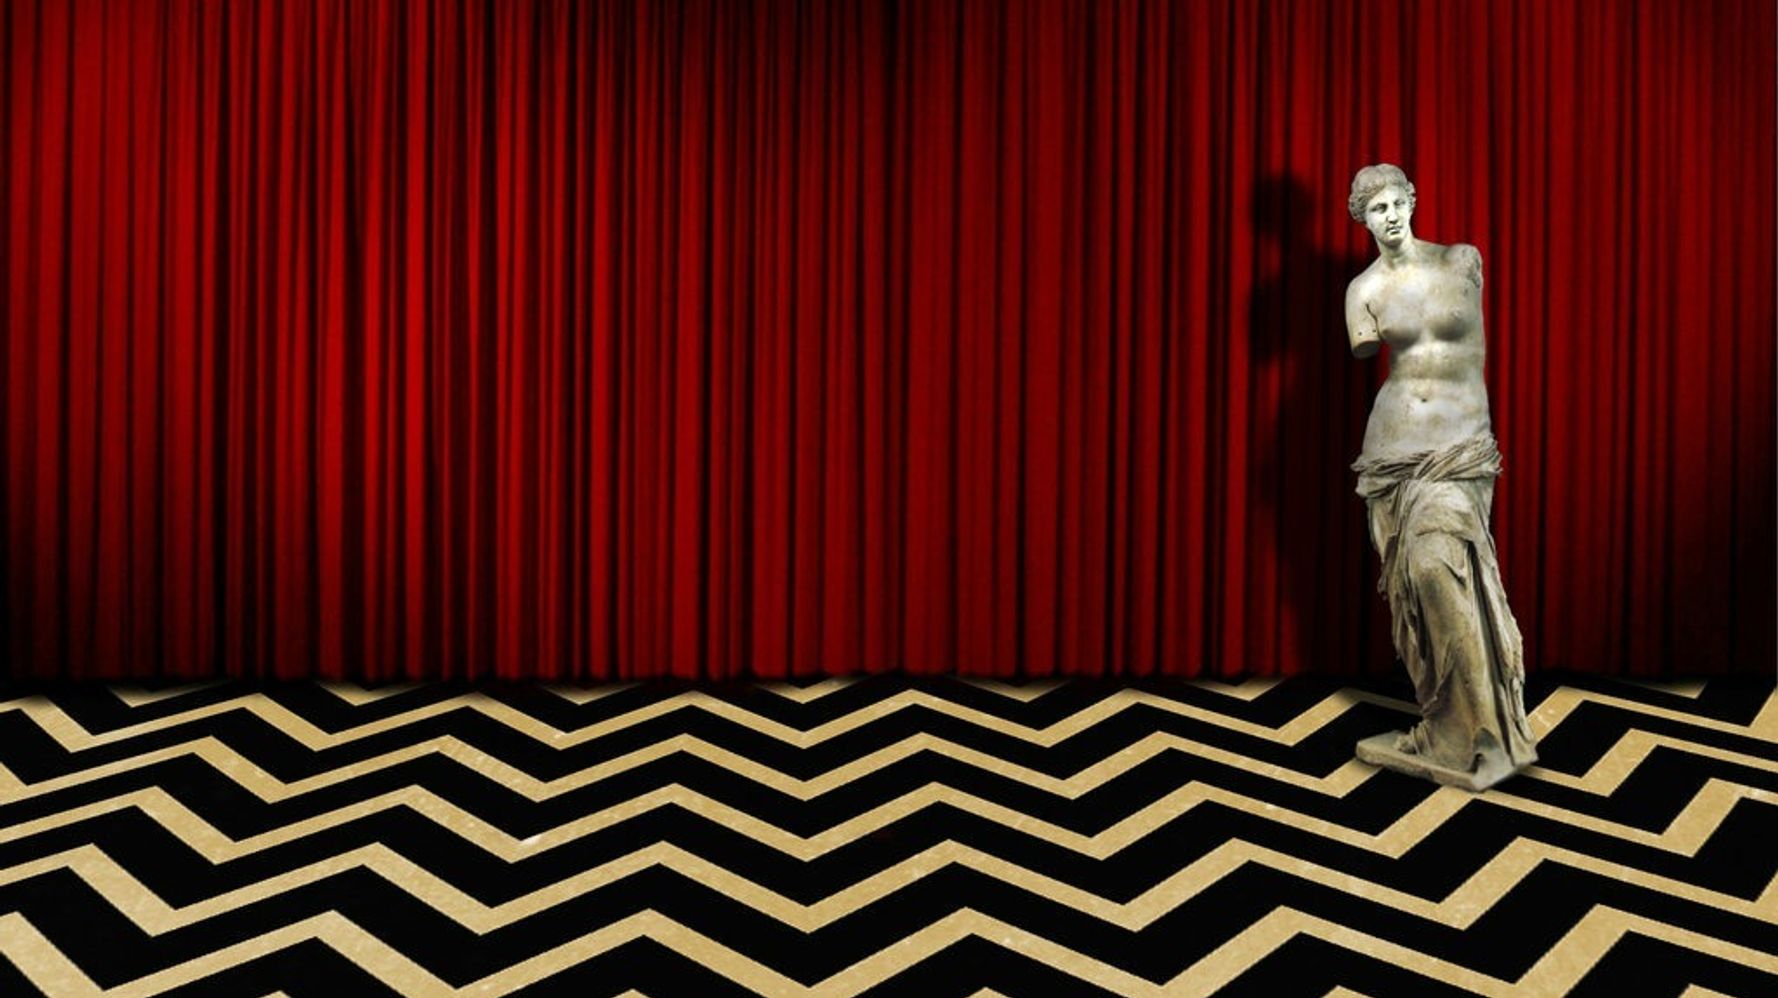 Waking from a Dream, Deprogramming from a (Twin Peaks) Cult.